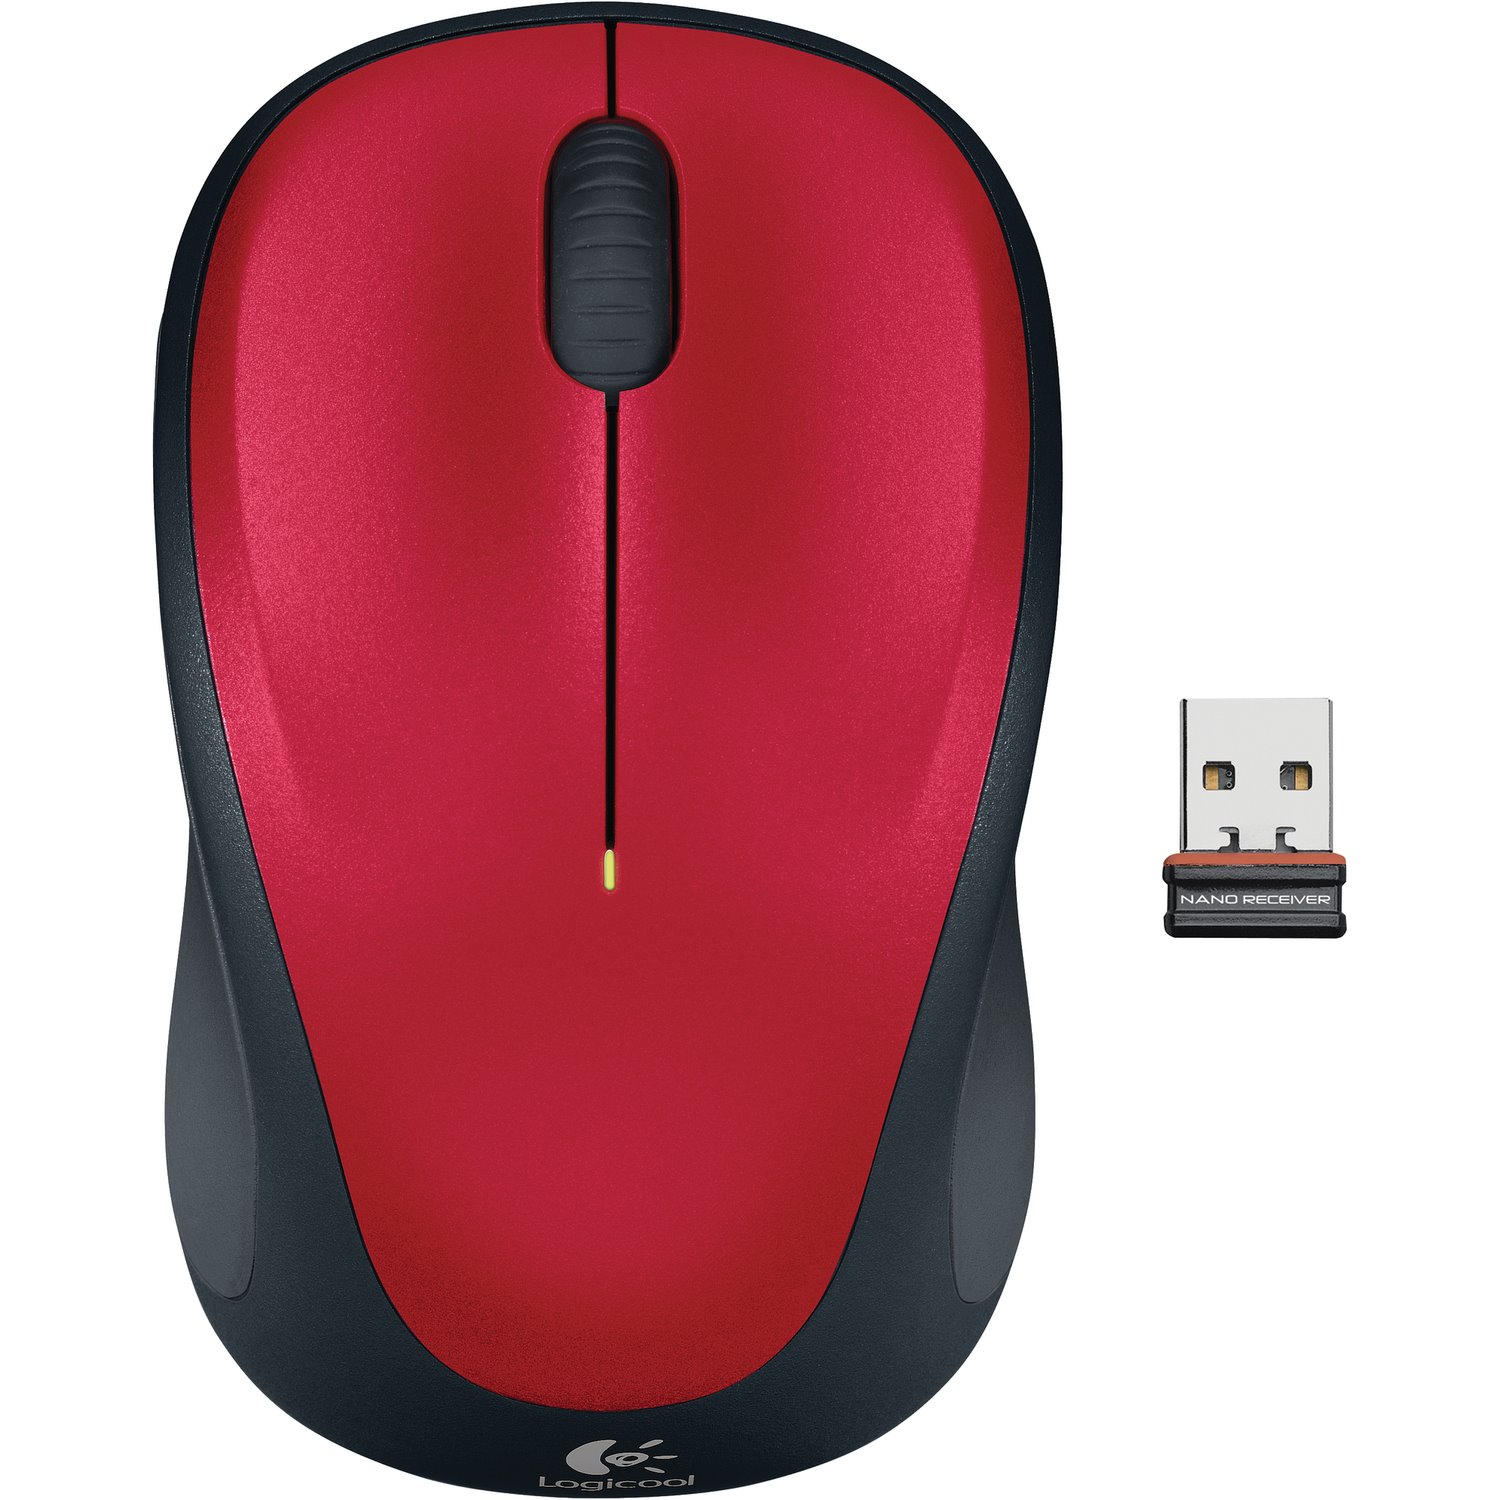 Logitech M235 Mouse - Radio Frequency - USB - Optical - Red